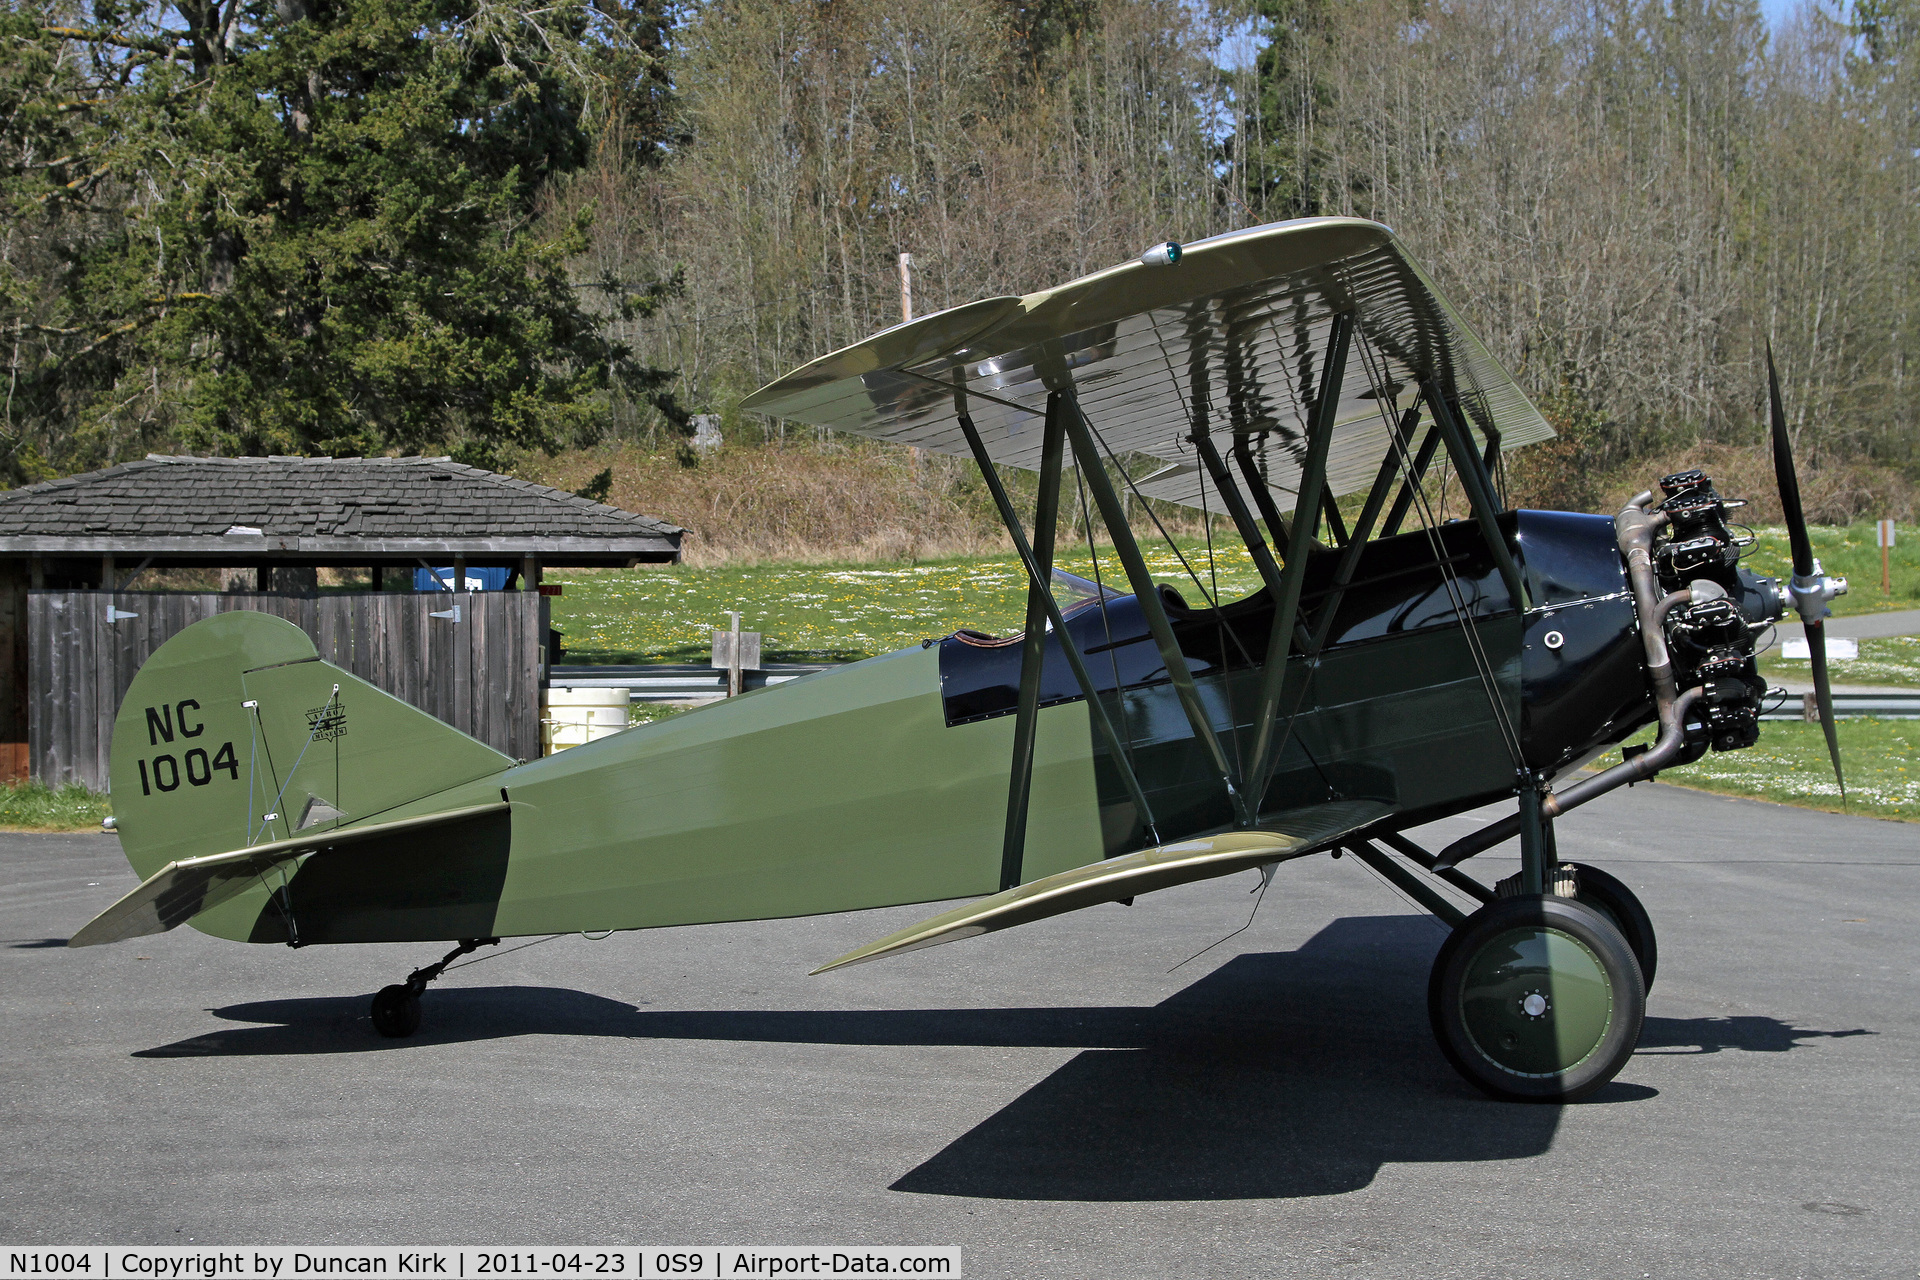 N1004, 1928 Curtiss-Wright Travel Air 4000 C/N 416, NC1004 provides joy rides for the locals